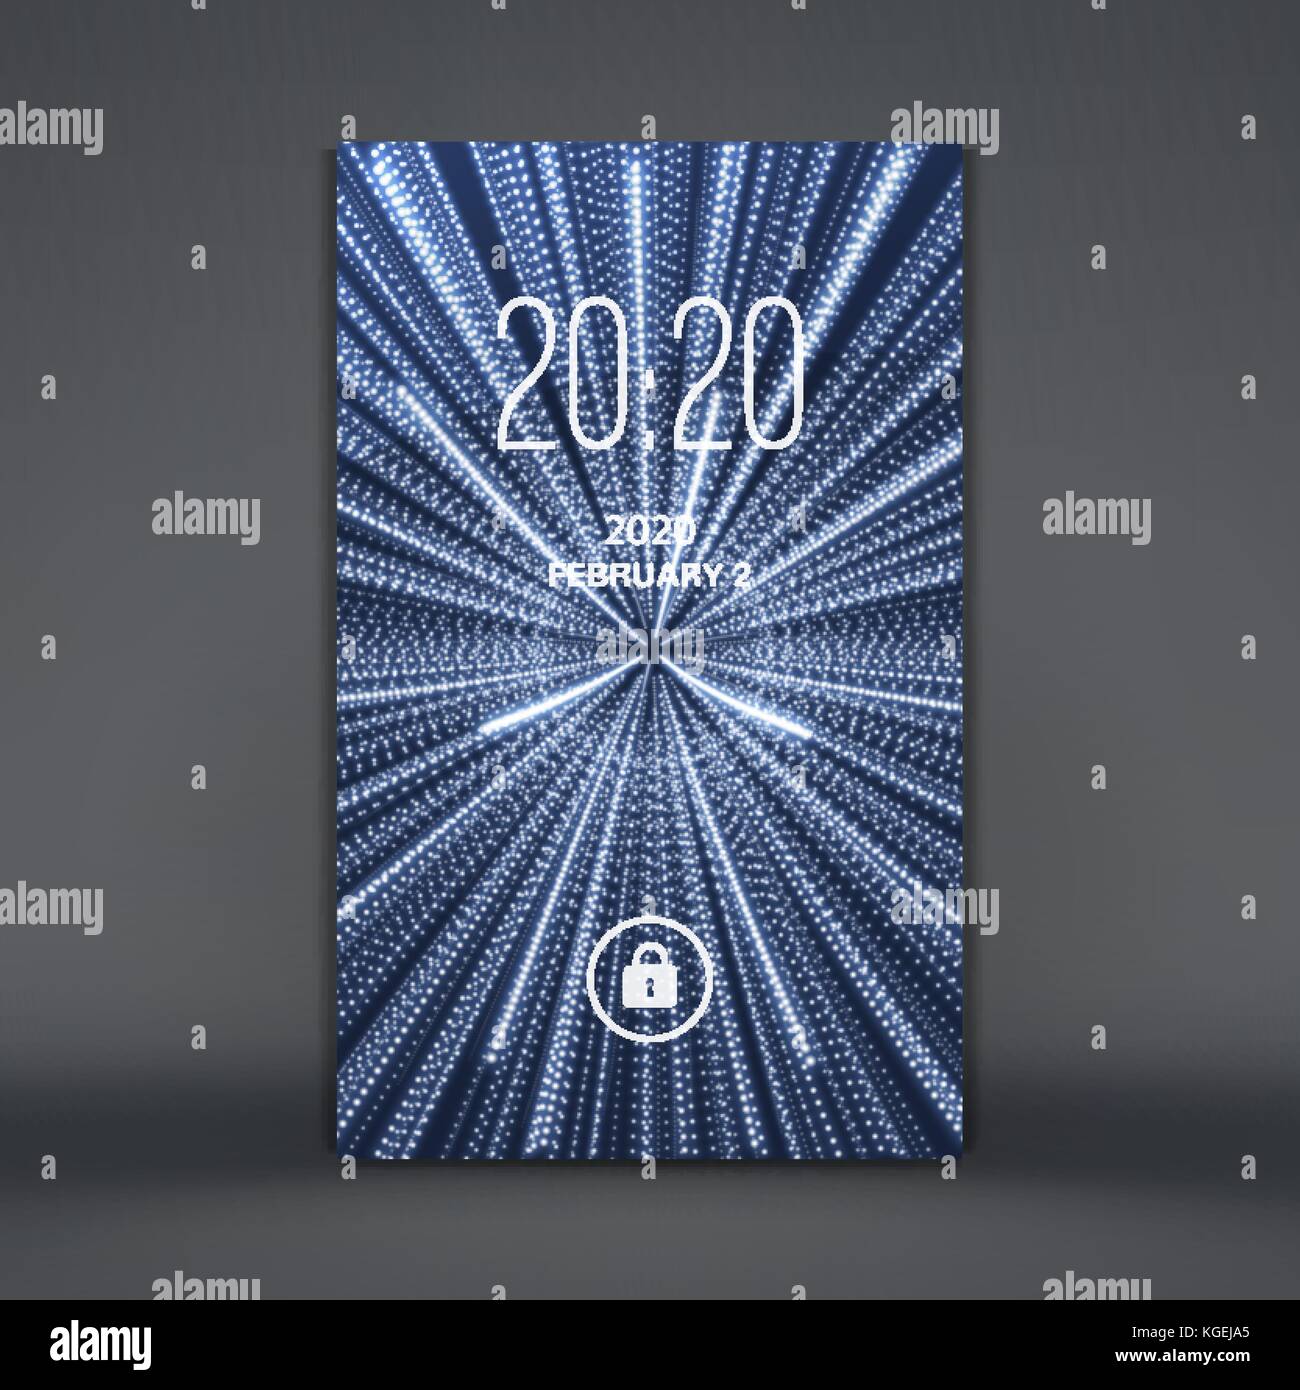 Modern lock screen for mobile apps. Smartphone. 3d grid background. Abstract vector illustration. Stock Vector